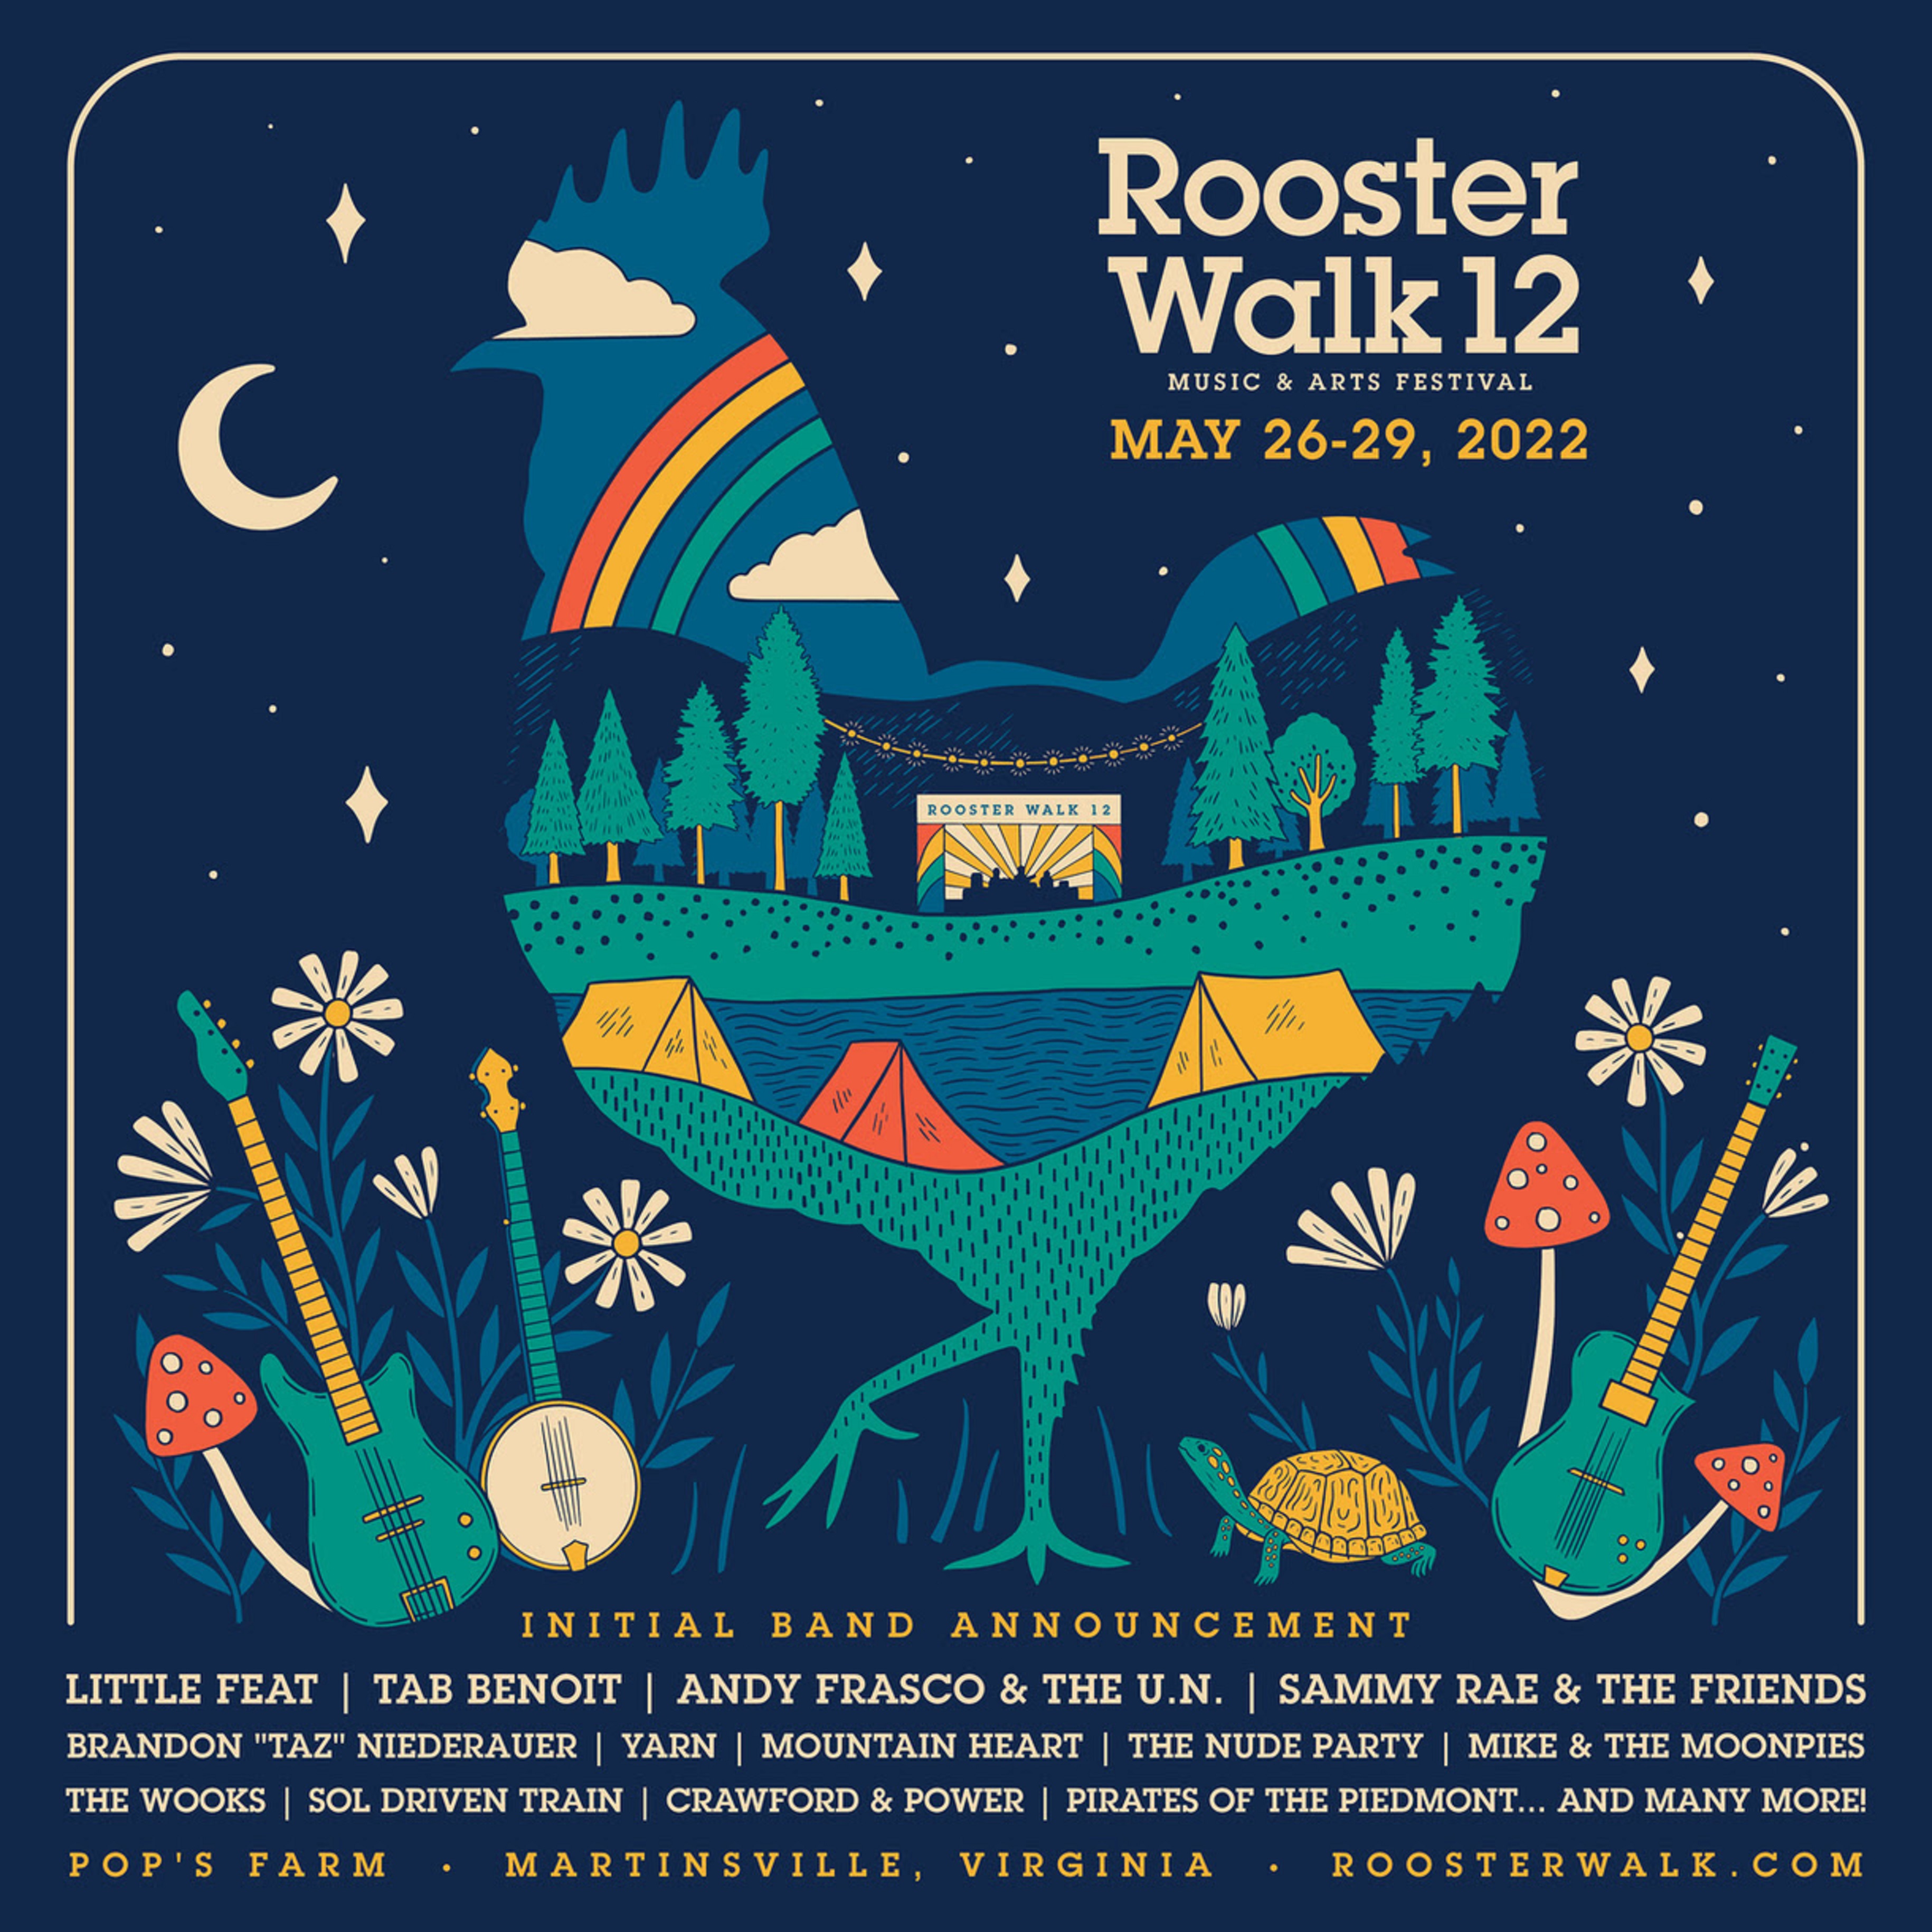 Just Announced: Rooster Walk 12 Initial Band Lineup